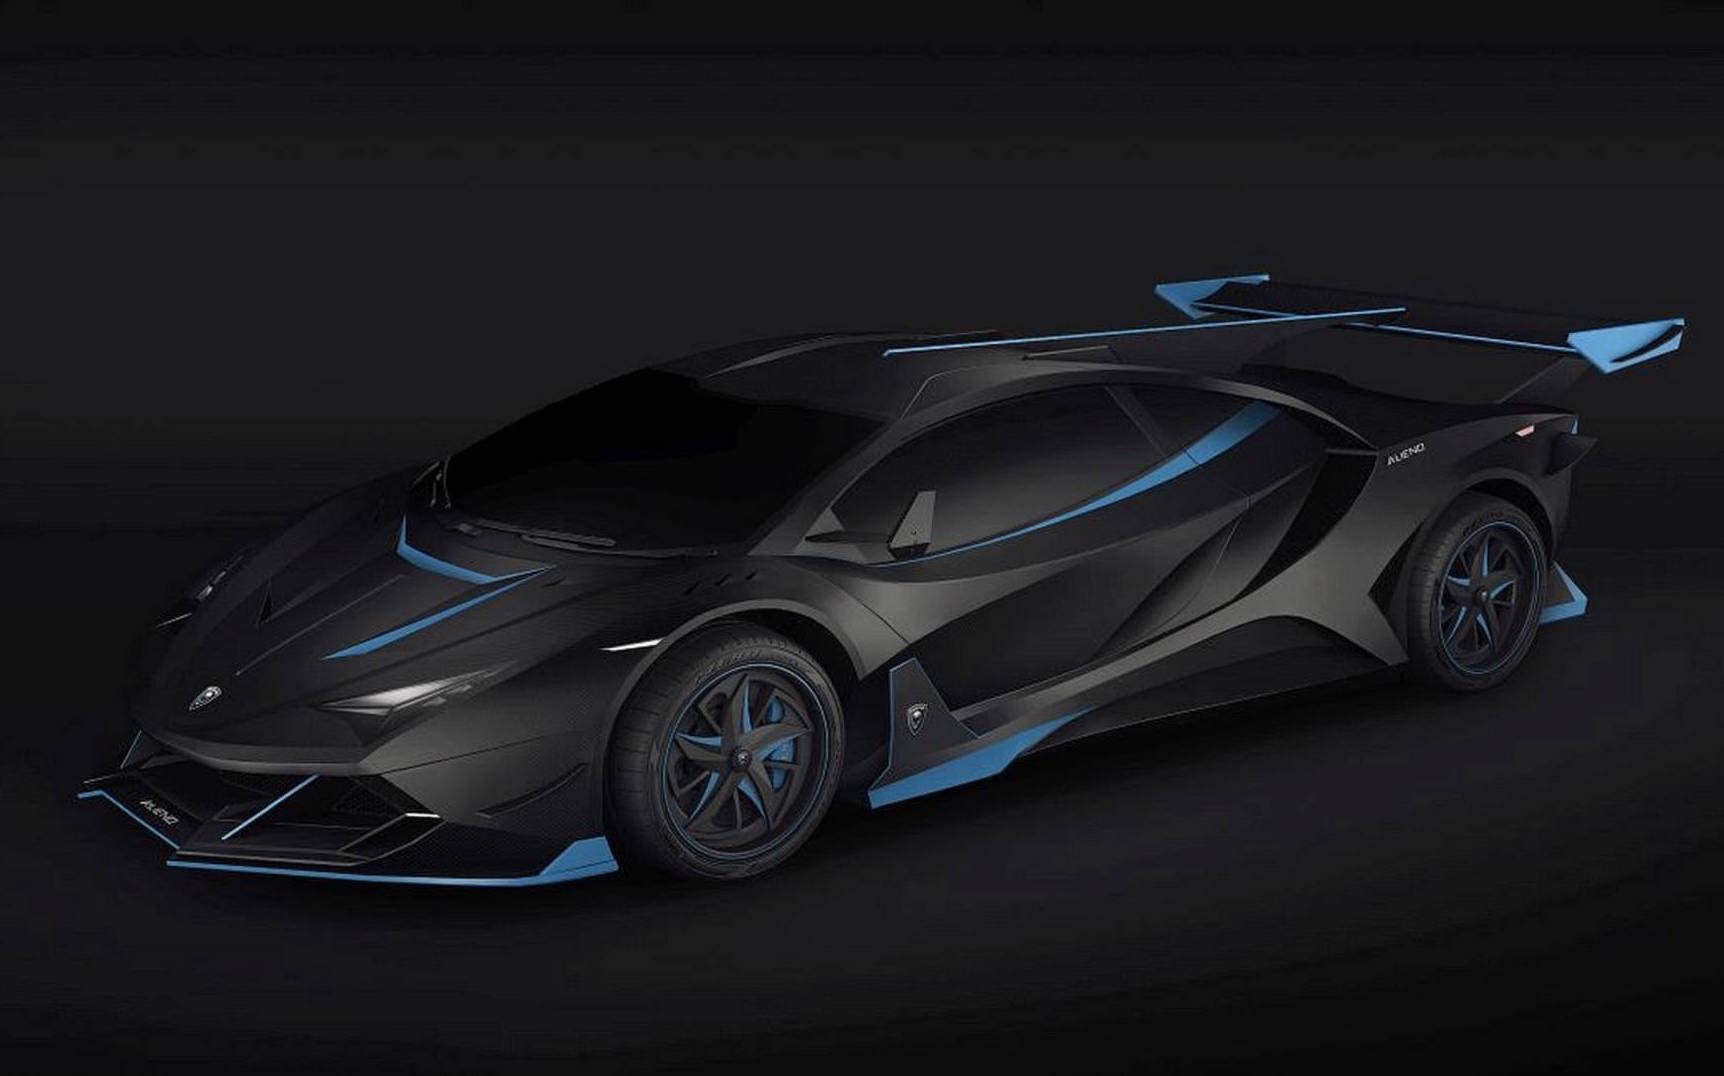 Alieno Arcanum pitched as 5000hp electric hypercar